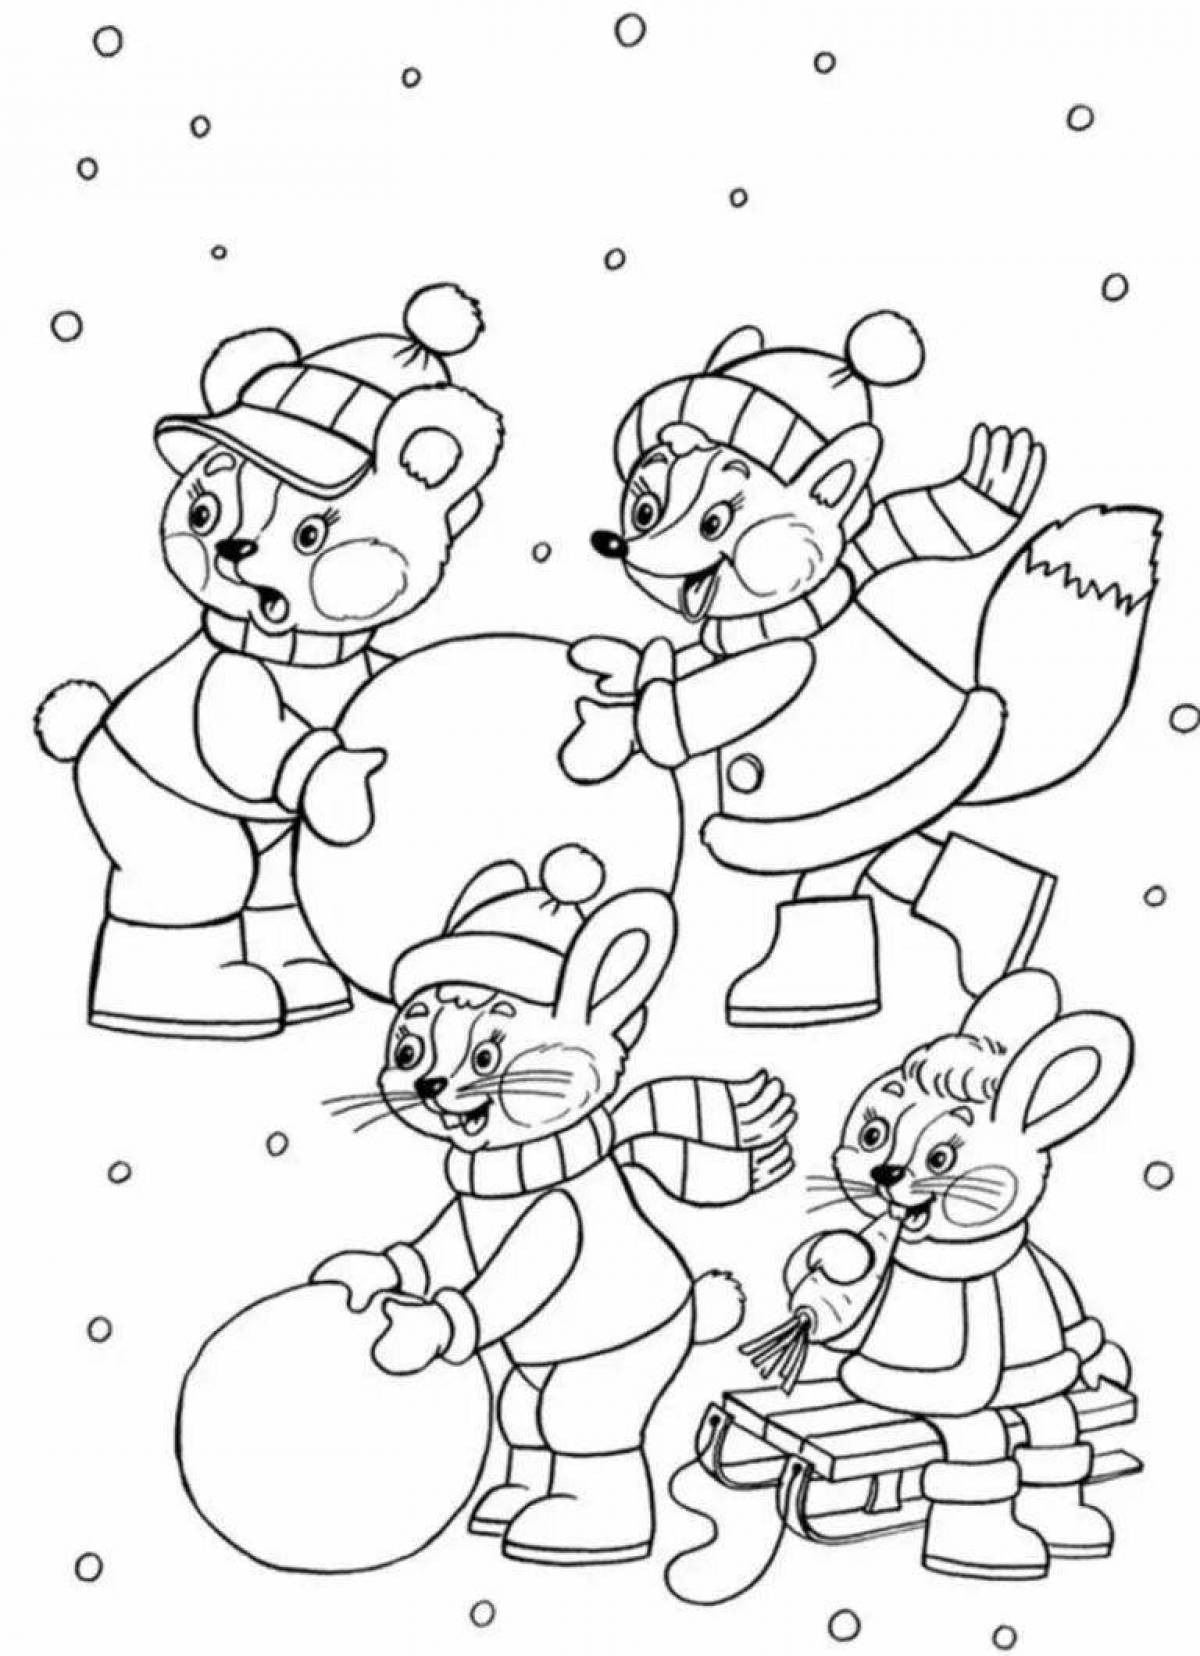 Fancy Christmas funny coloring book